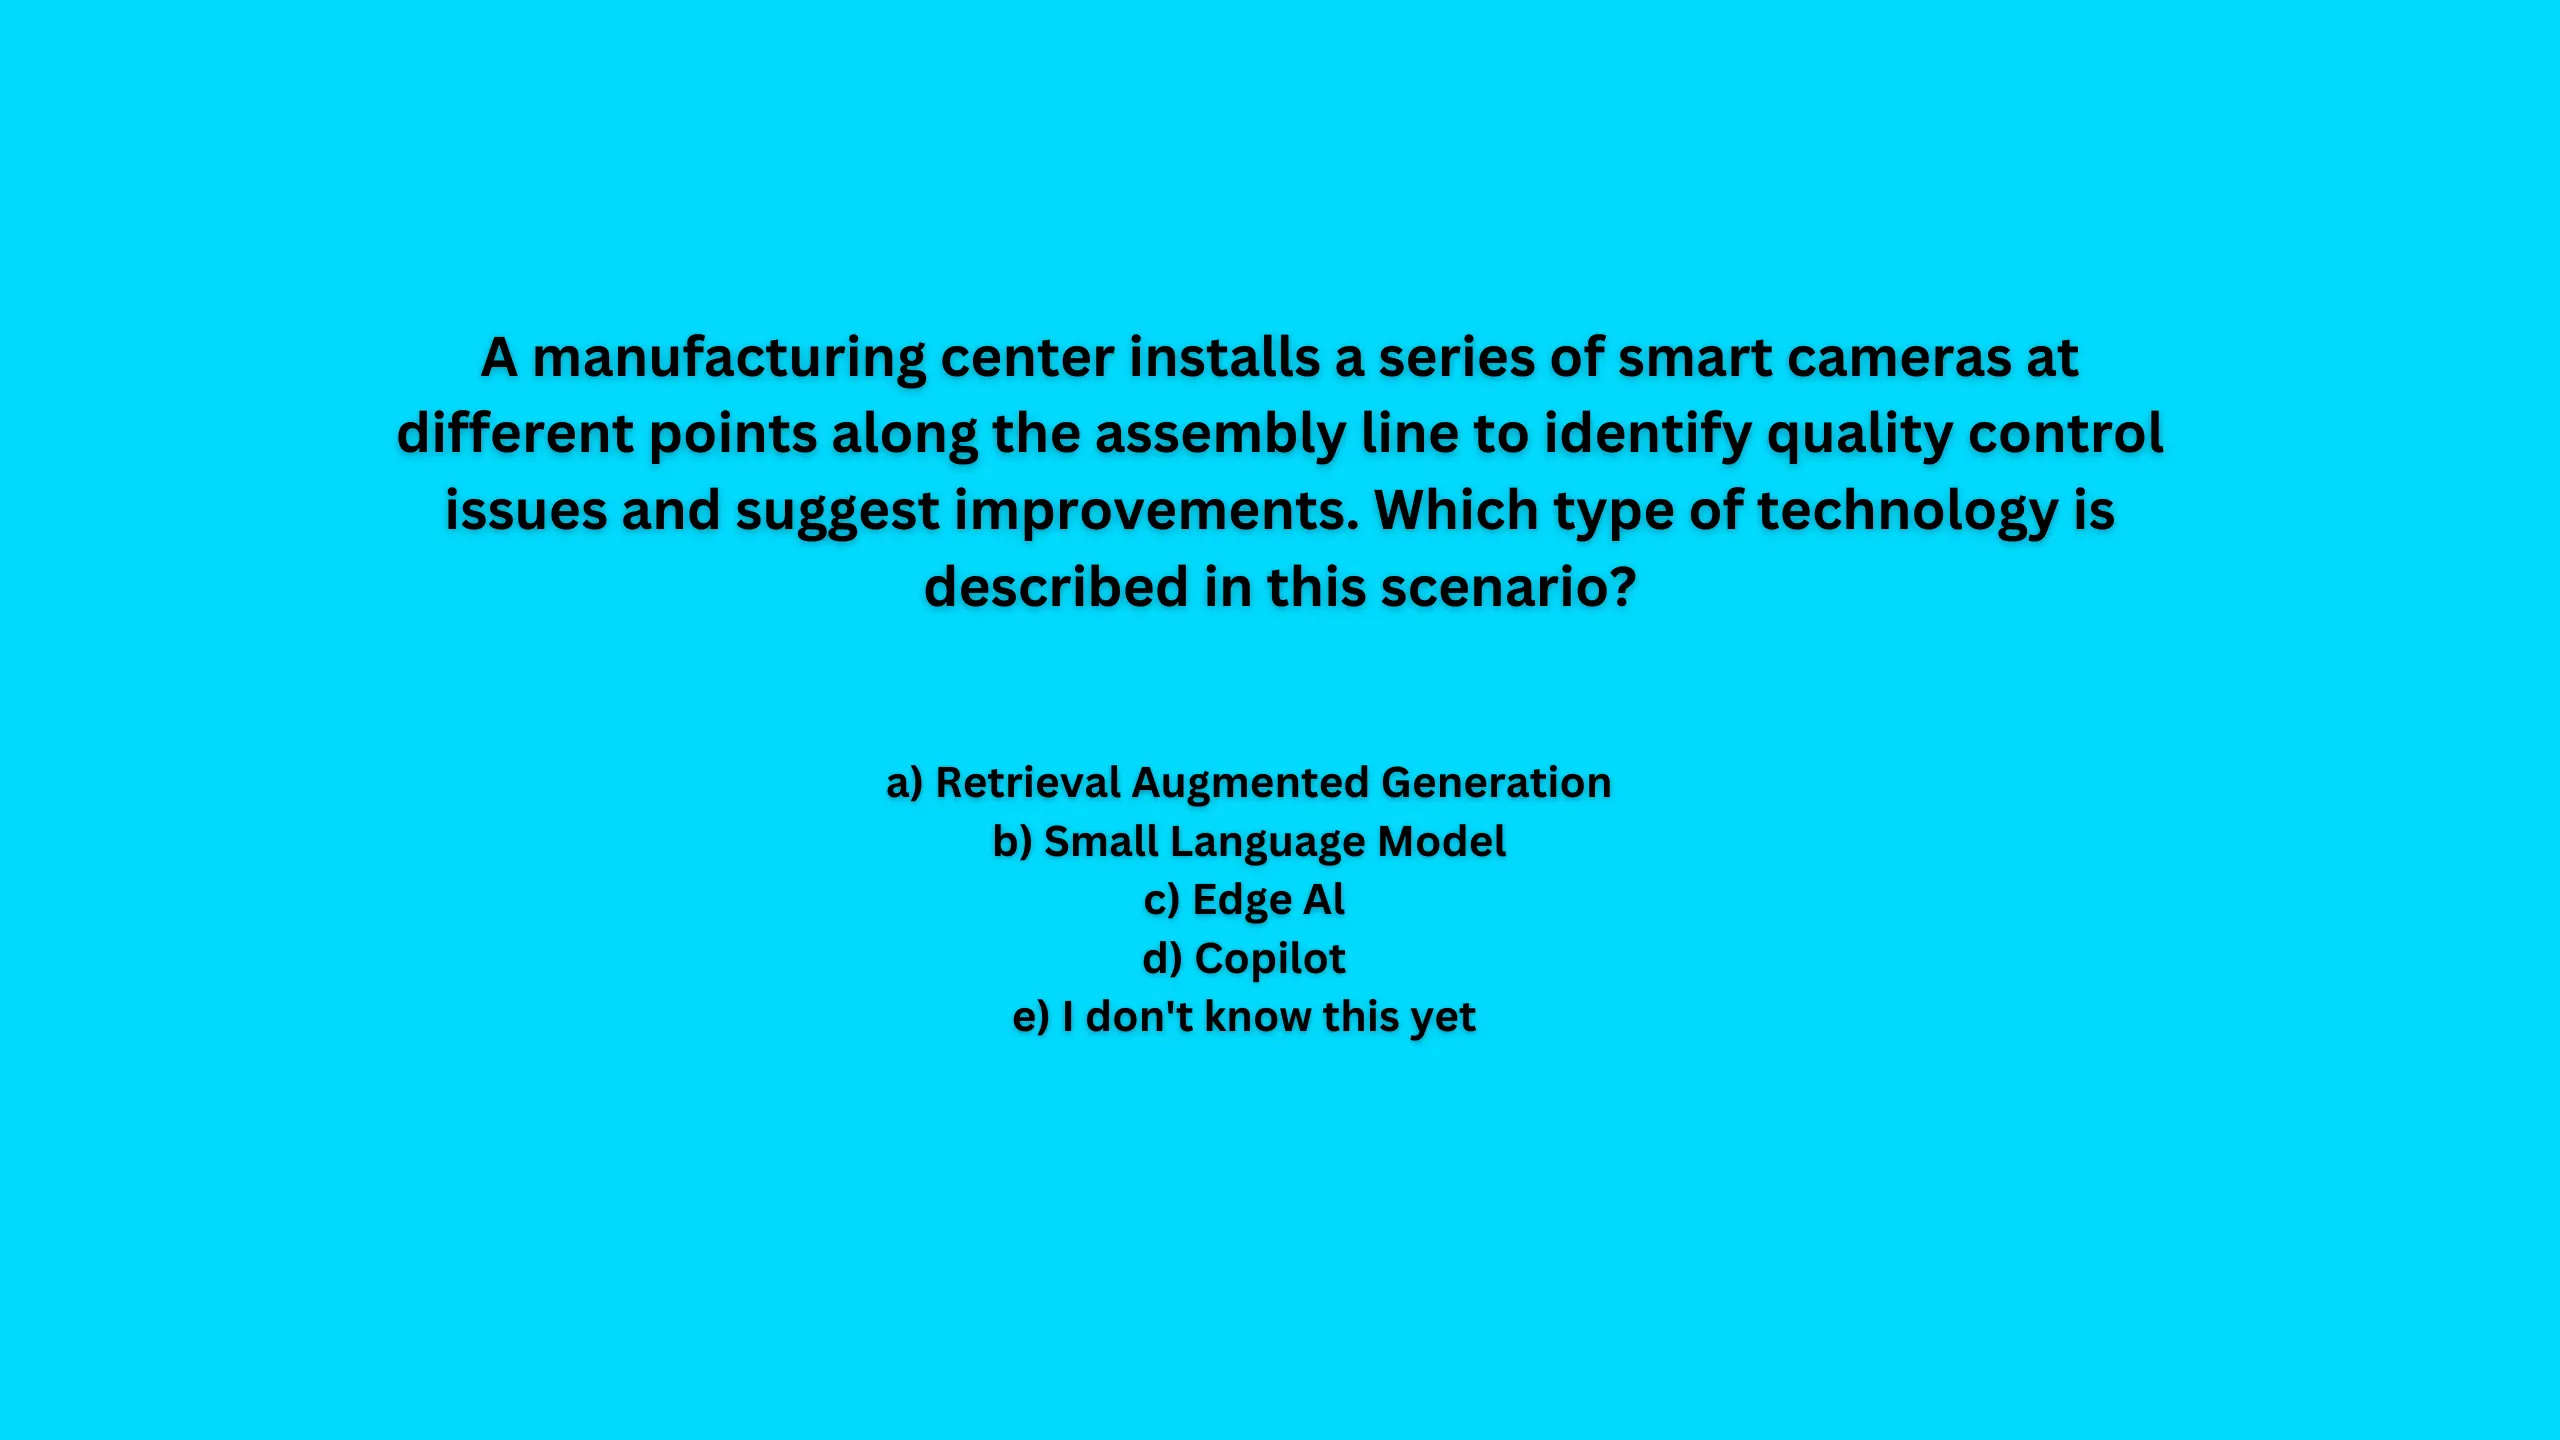 A manufacturing center installs a series of smart cameras at different points along the assembly line to identify quality control issues and suggest improvements. Which type of technology is described in this scenario?